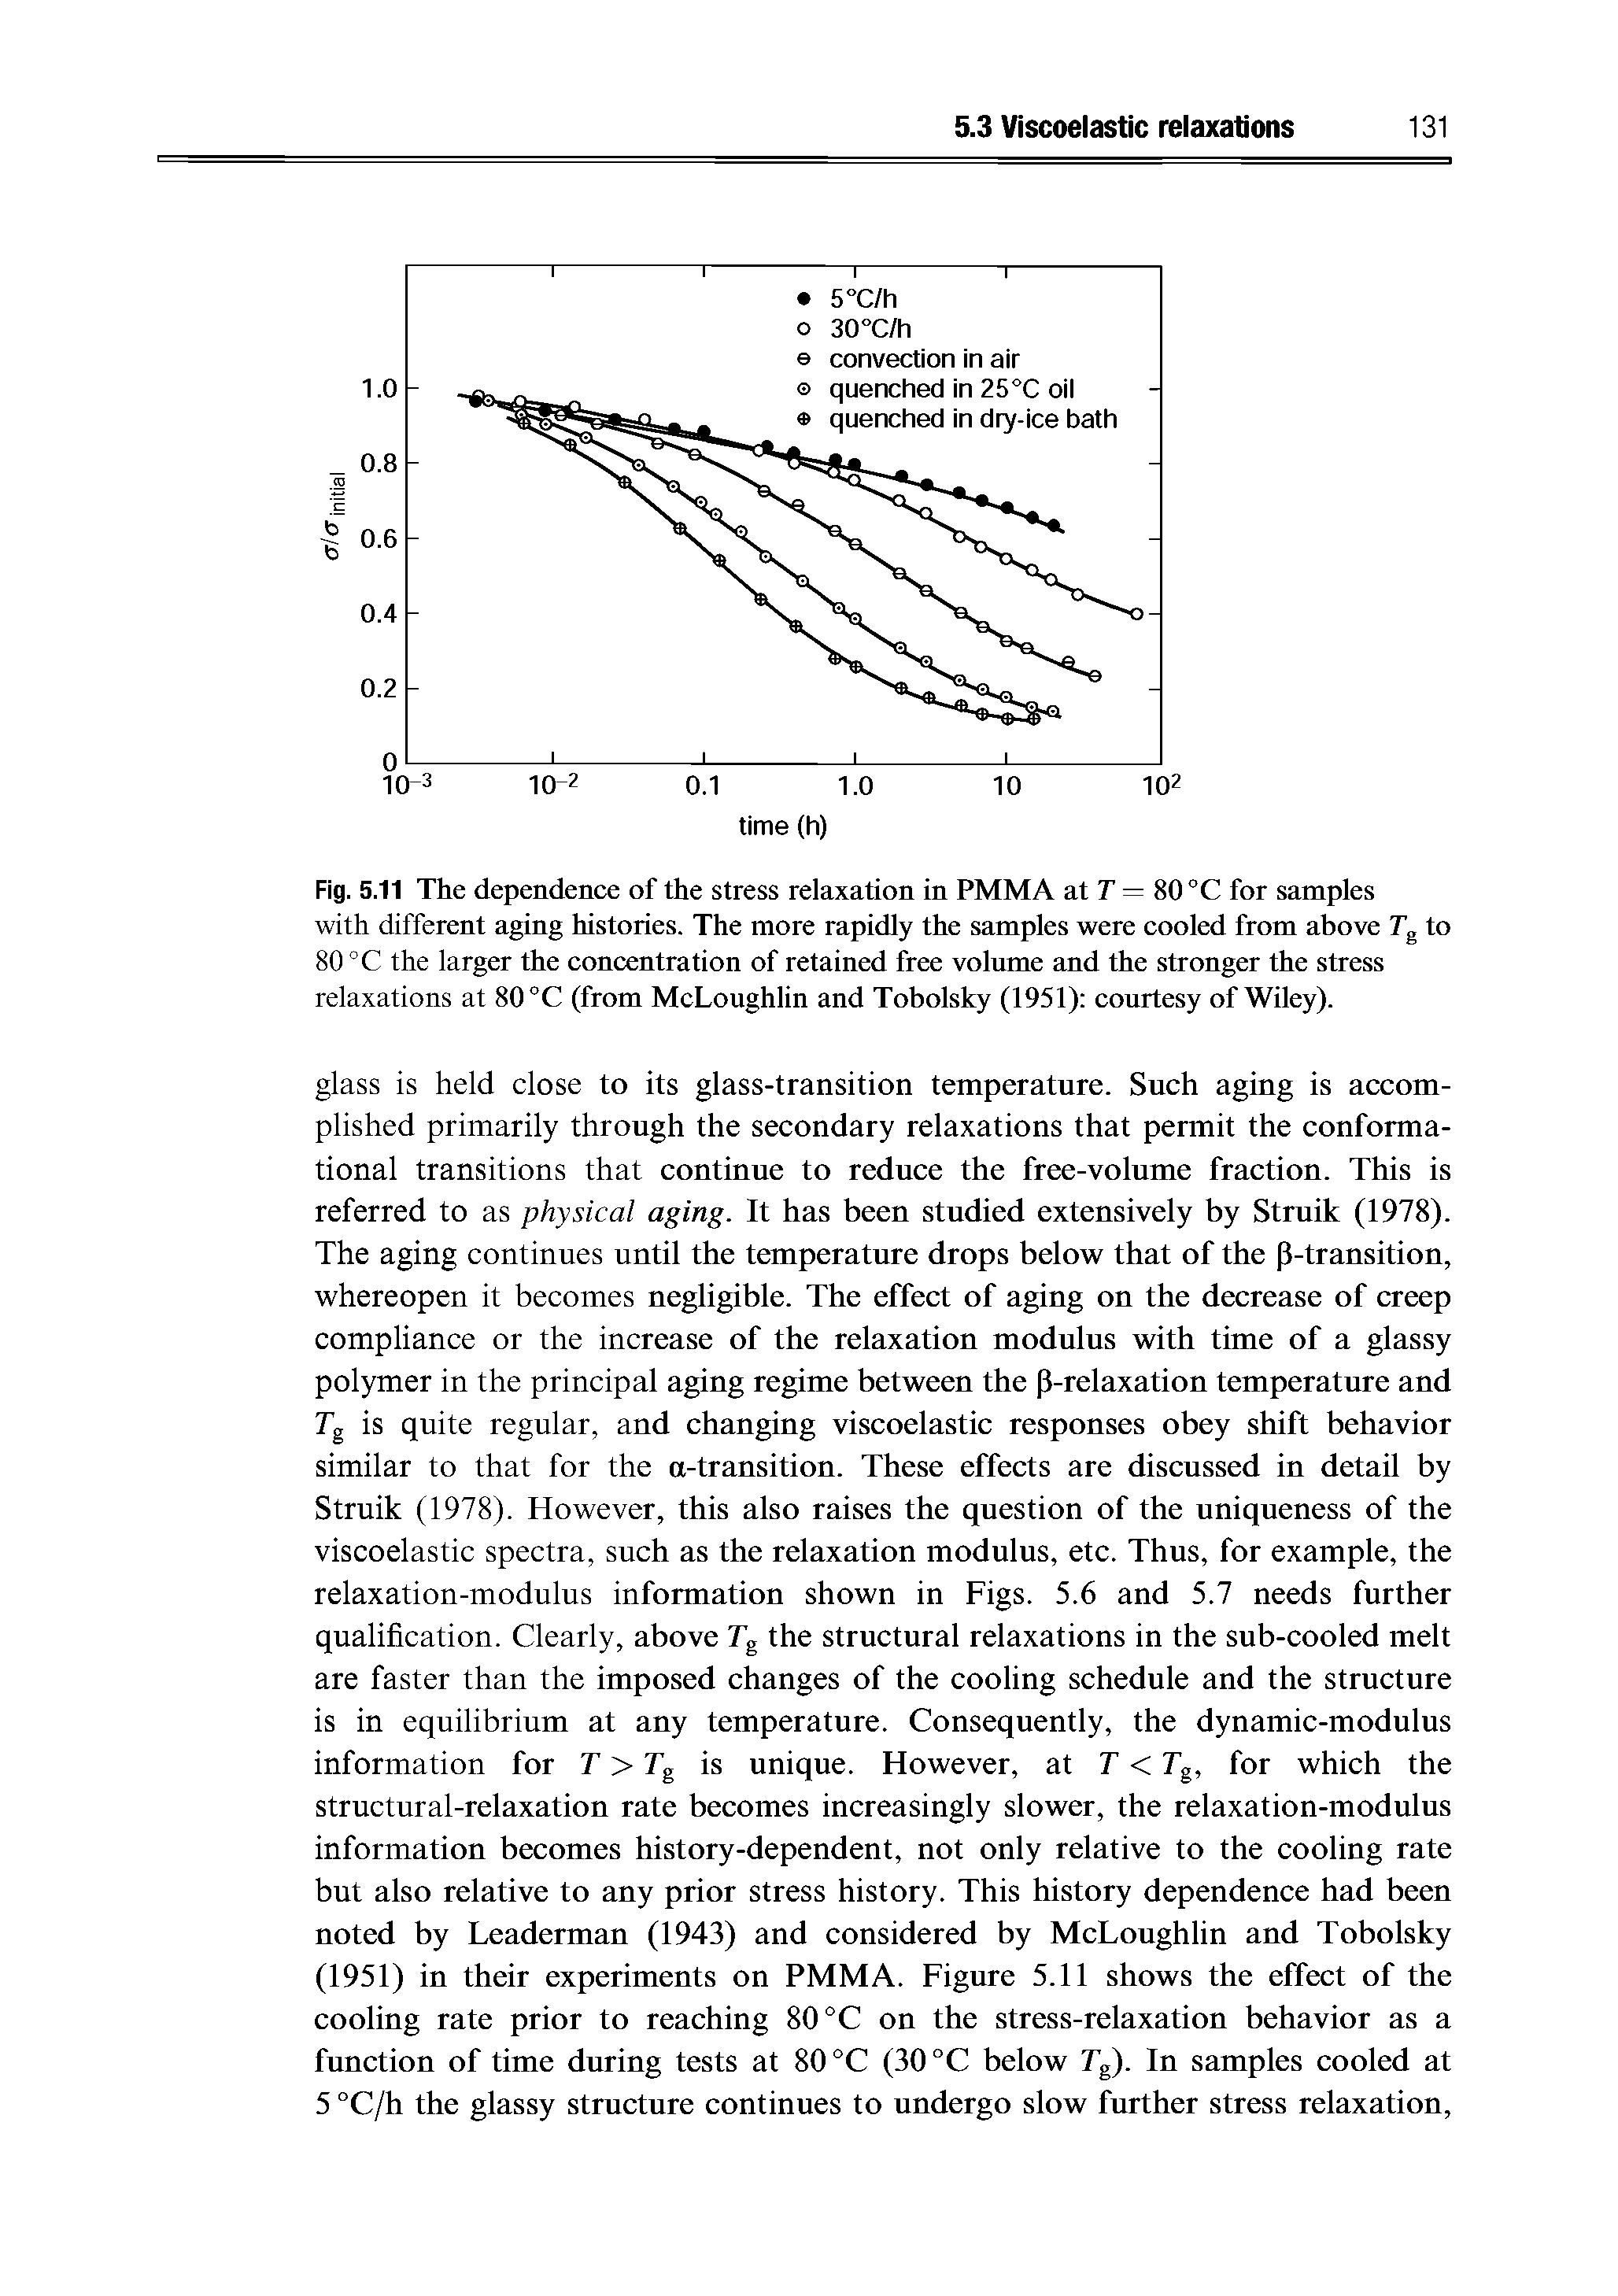 Fig. 5.11 The dependence of the stress relaxation in PMMA at T = 80 C for samples with different aging histories. The more rapidly the samples were cooled from above Tg to 80 °C the larger the concentration of retained free volume and the stronger the stress relaxations at 80 C (from McLoughlin and Tobolsky (1951) courtesy of Wiley).